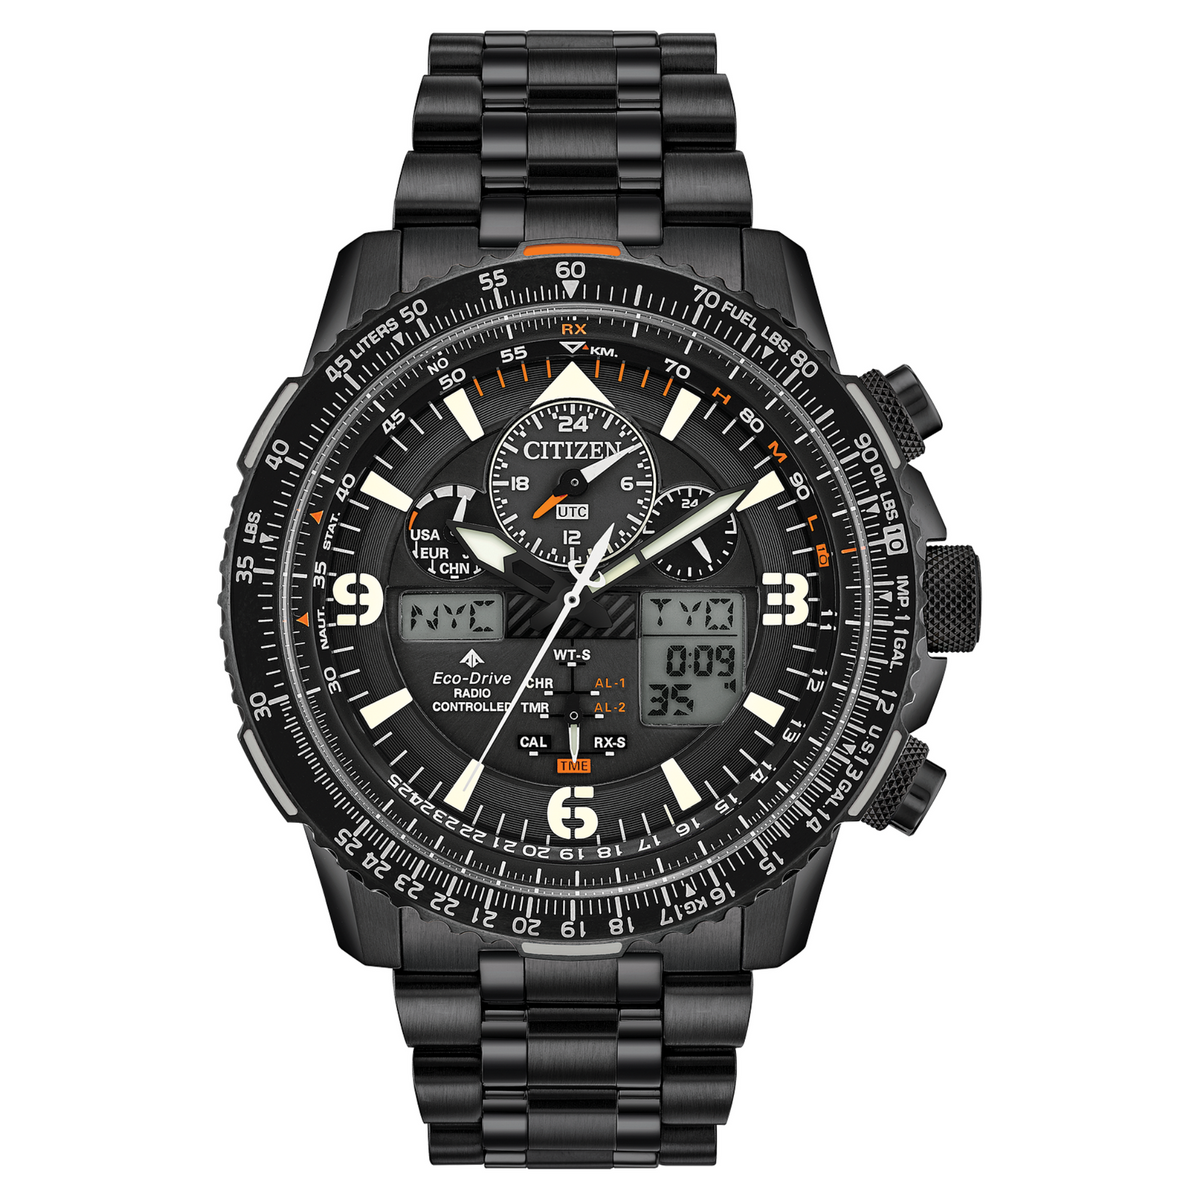 Citizen Eco Drive Promaster Skyhawk A-T Black Ion Plated Watch JY8075-51E